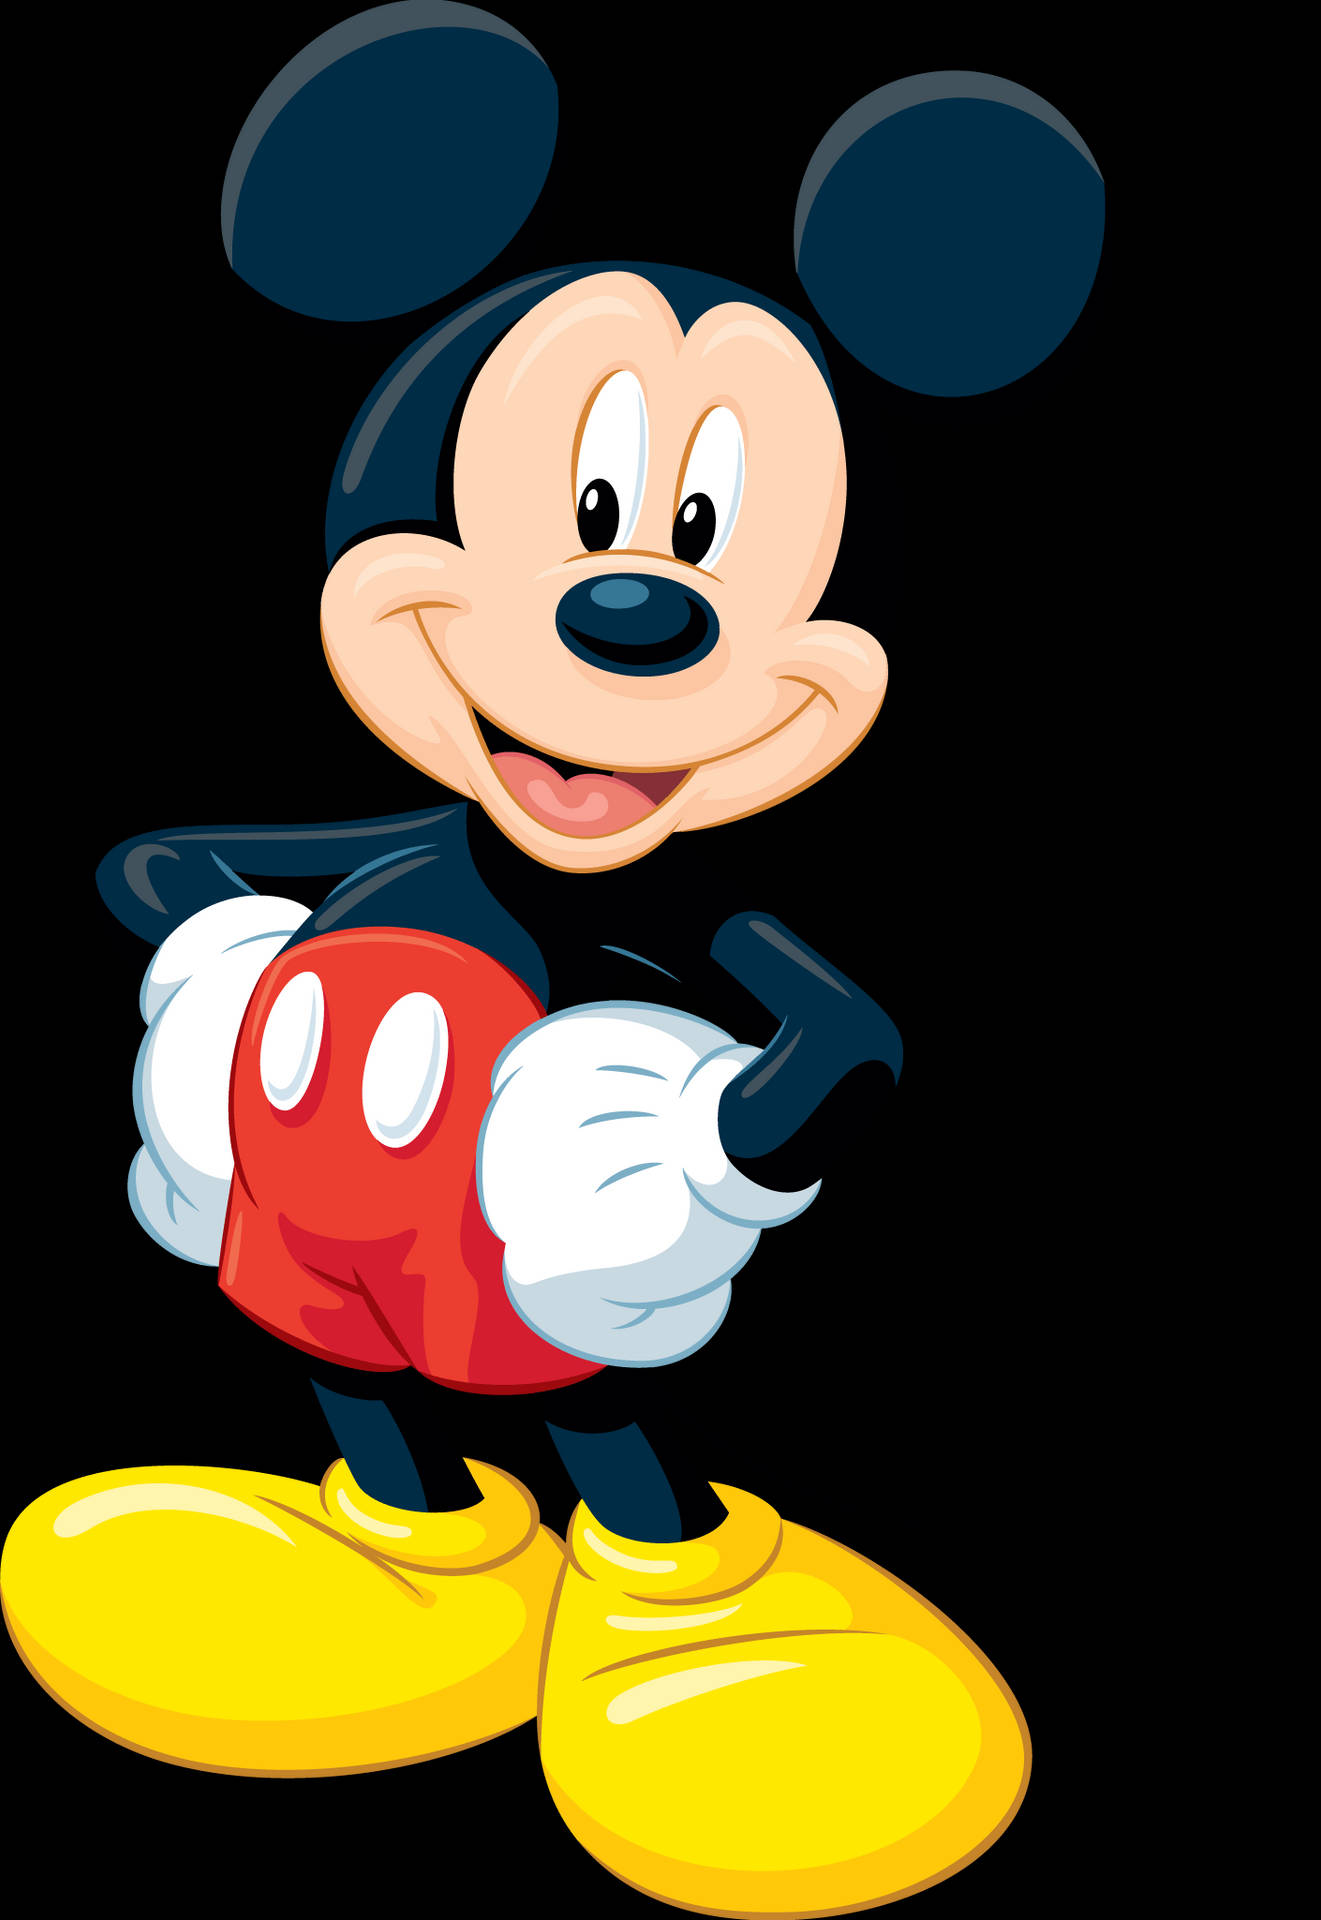 Mickey Mouse with a Big Smile Wallpaper